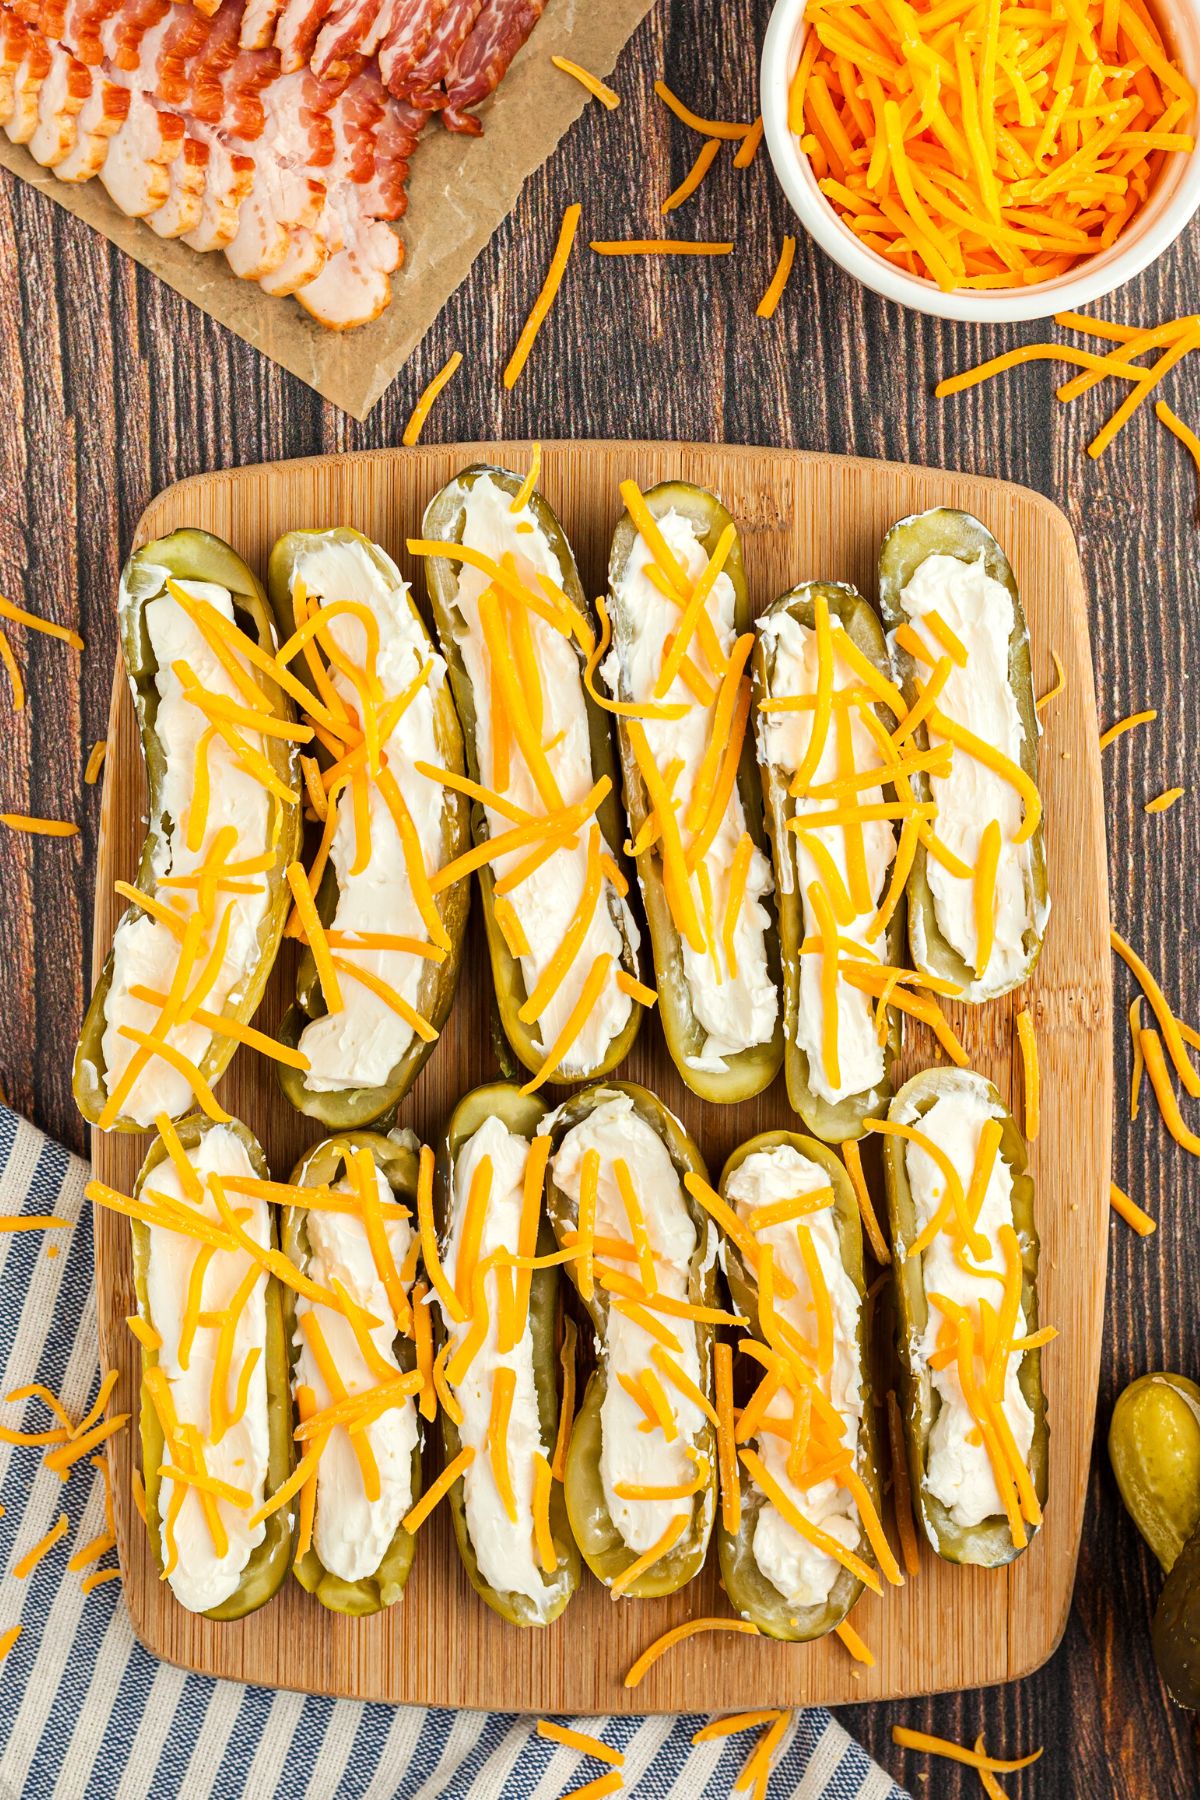 Pickles sliced in half and filled with cream cheese and shredded cheddar cheese